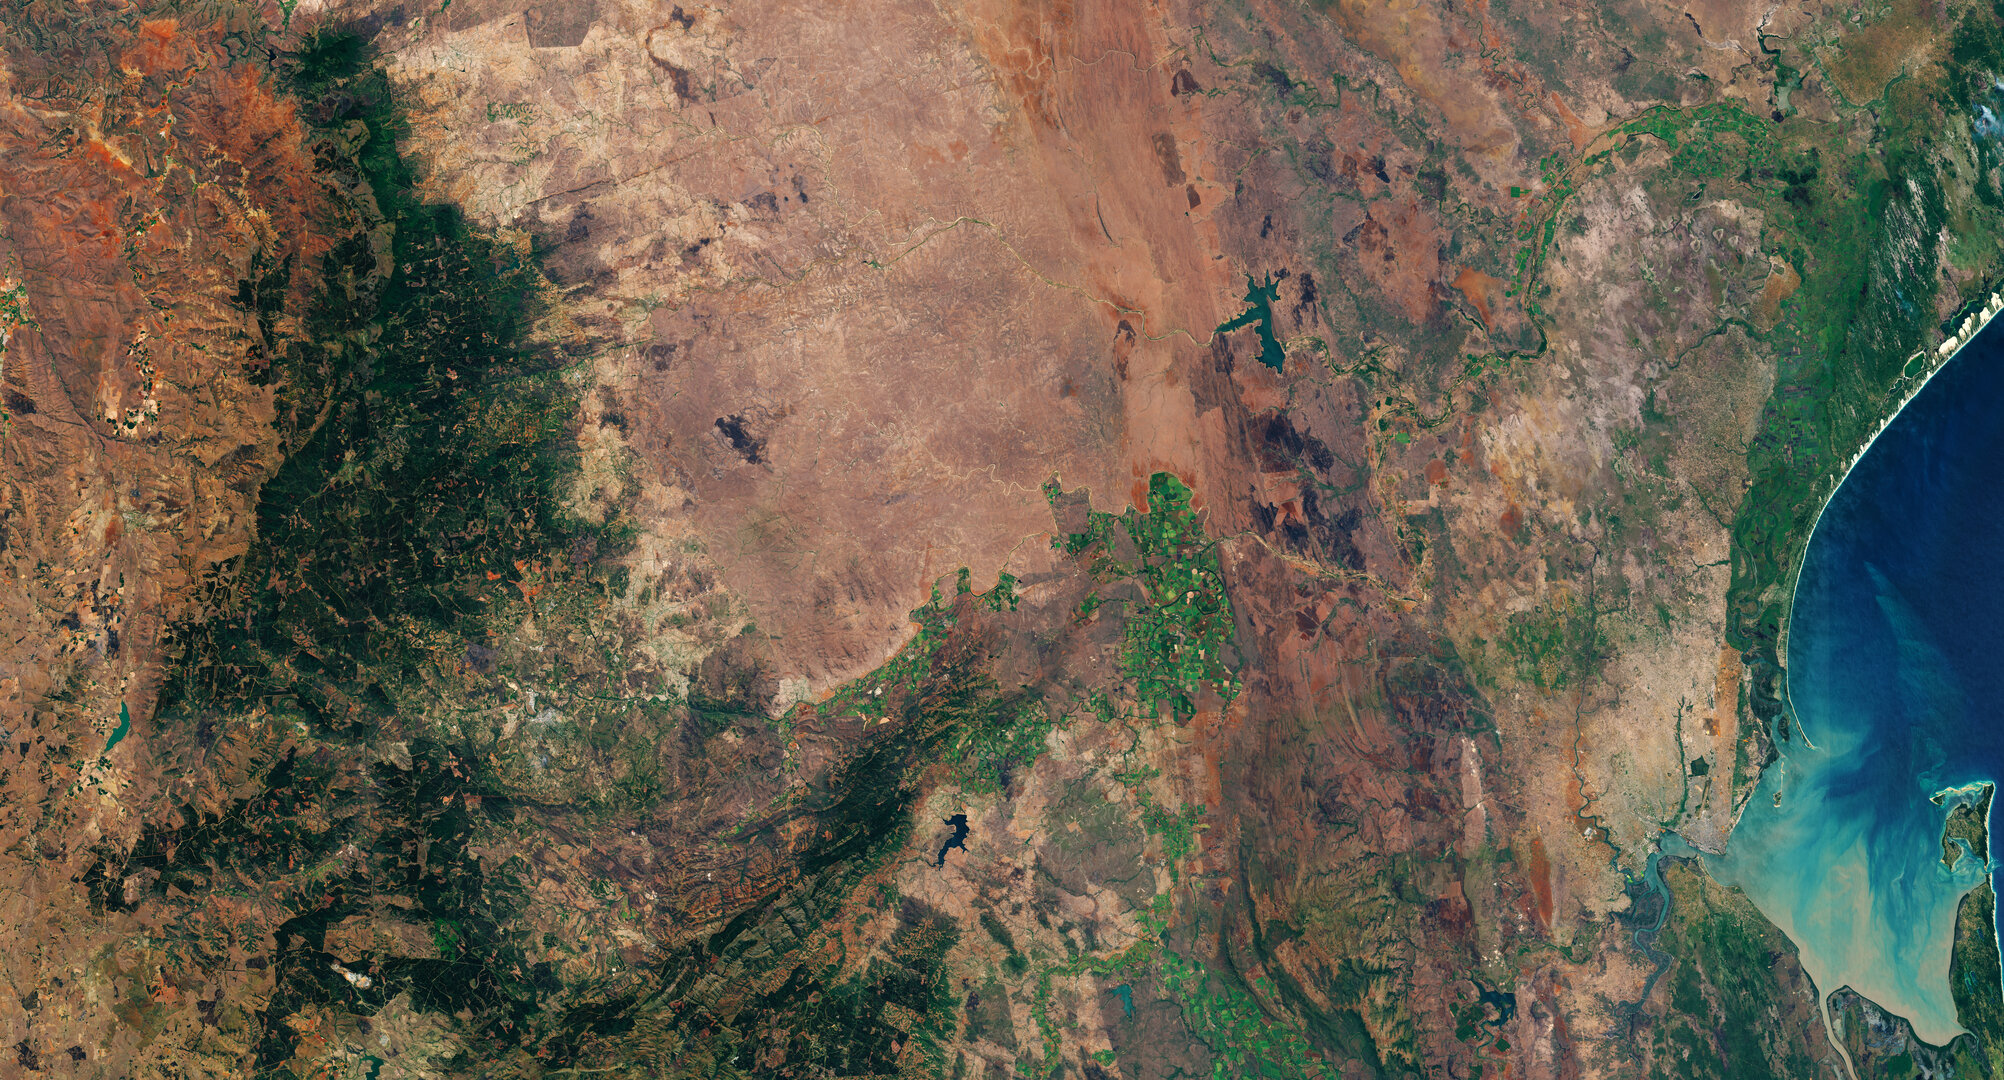 Captured by the Copernicus Sentinel-2 mission, this image shows the Crocodile River, which rises in the Steenkampsberg Mountains of Mpumalanga Province and traverses South Africa before flowing through Mozambique and into the Indian Ocean.